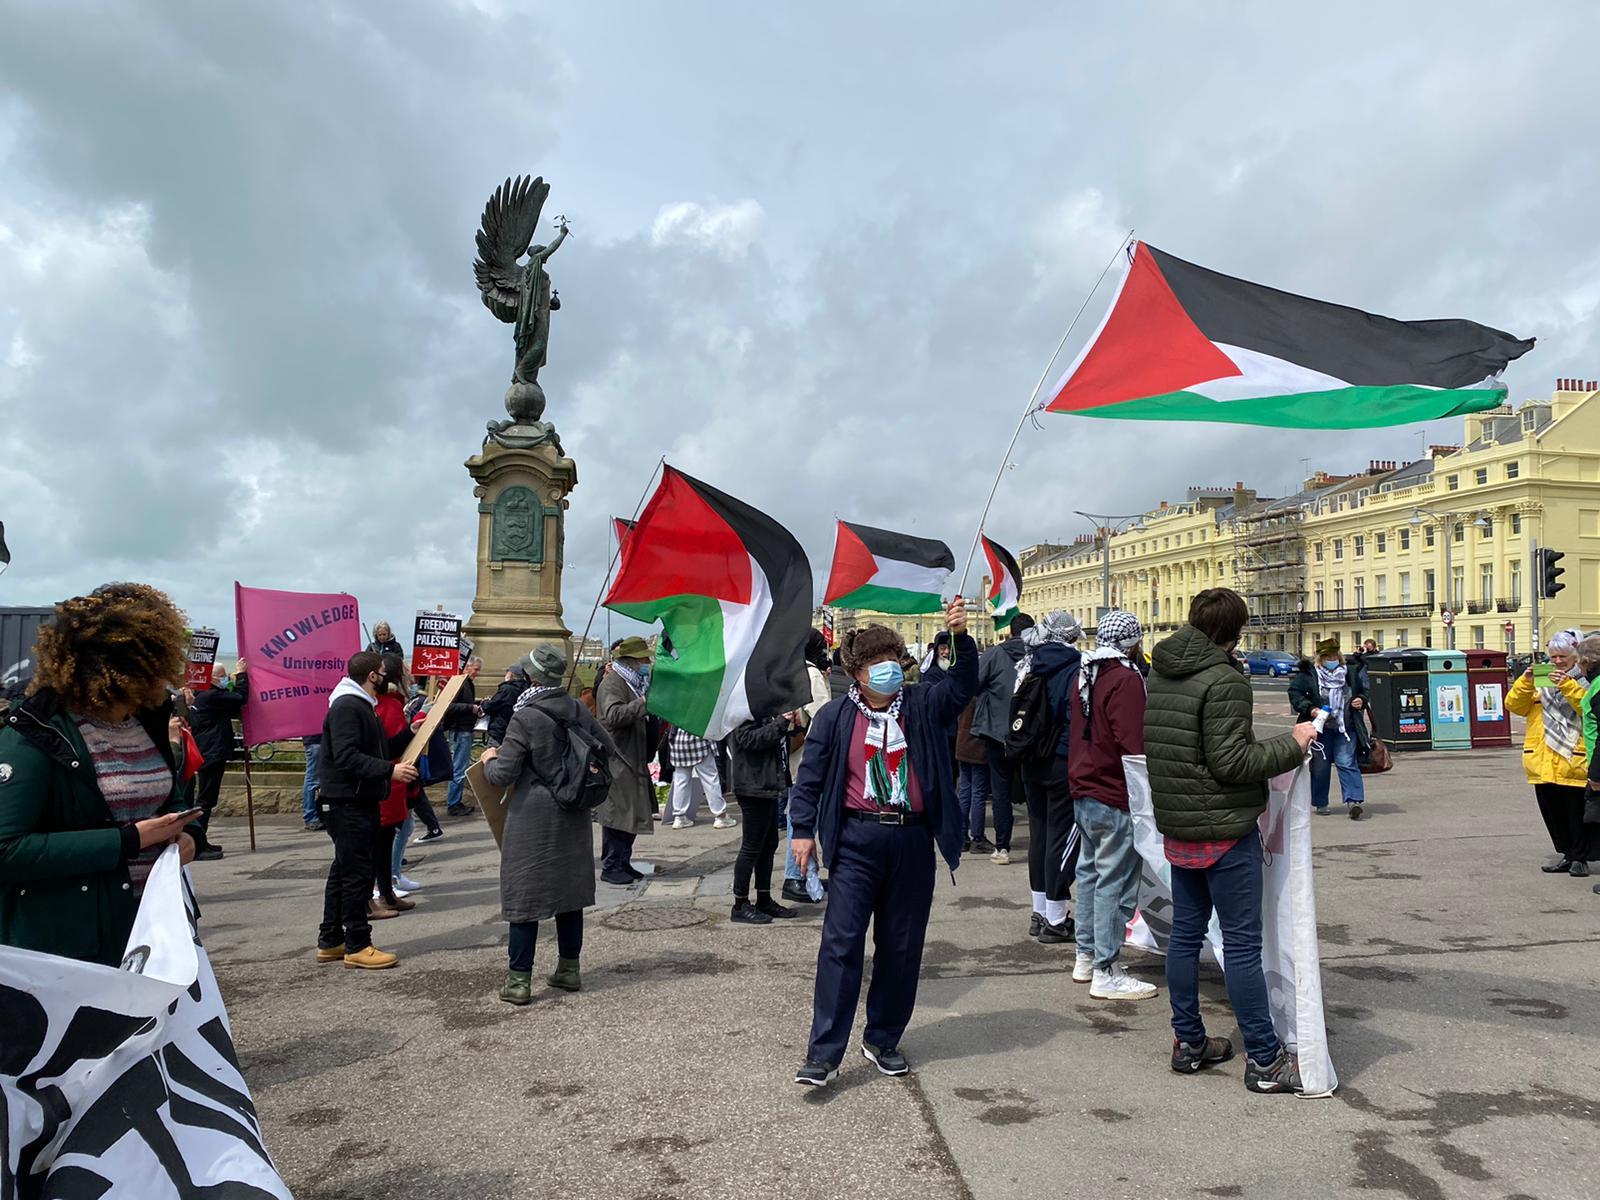 Demonstrators gathered at the Peace Statue at Hove Lawns to raise their concerns about Israeli air strikes during the recent conflict with Hamas in Gaza